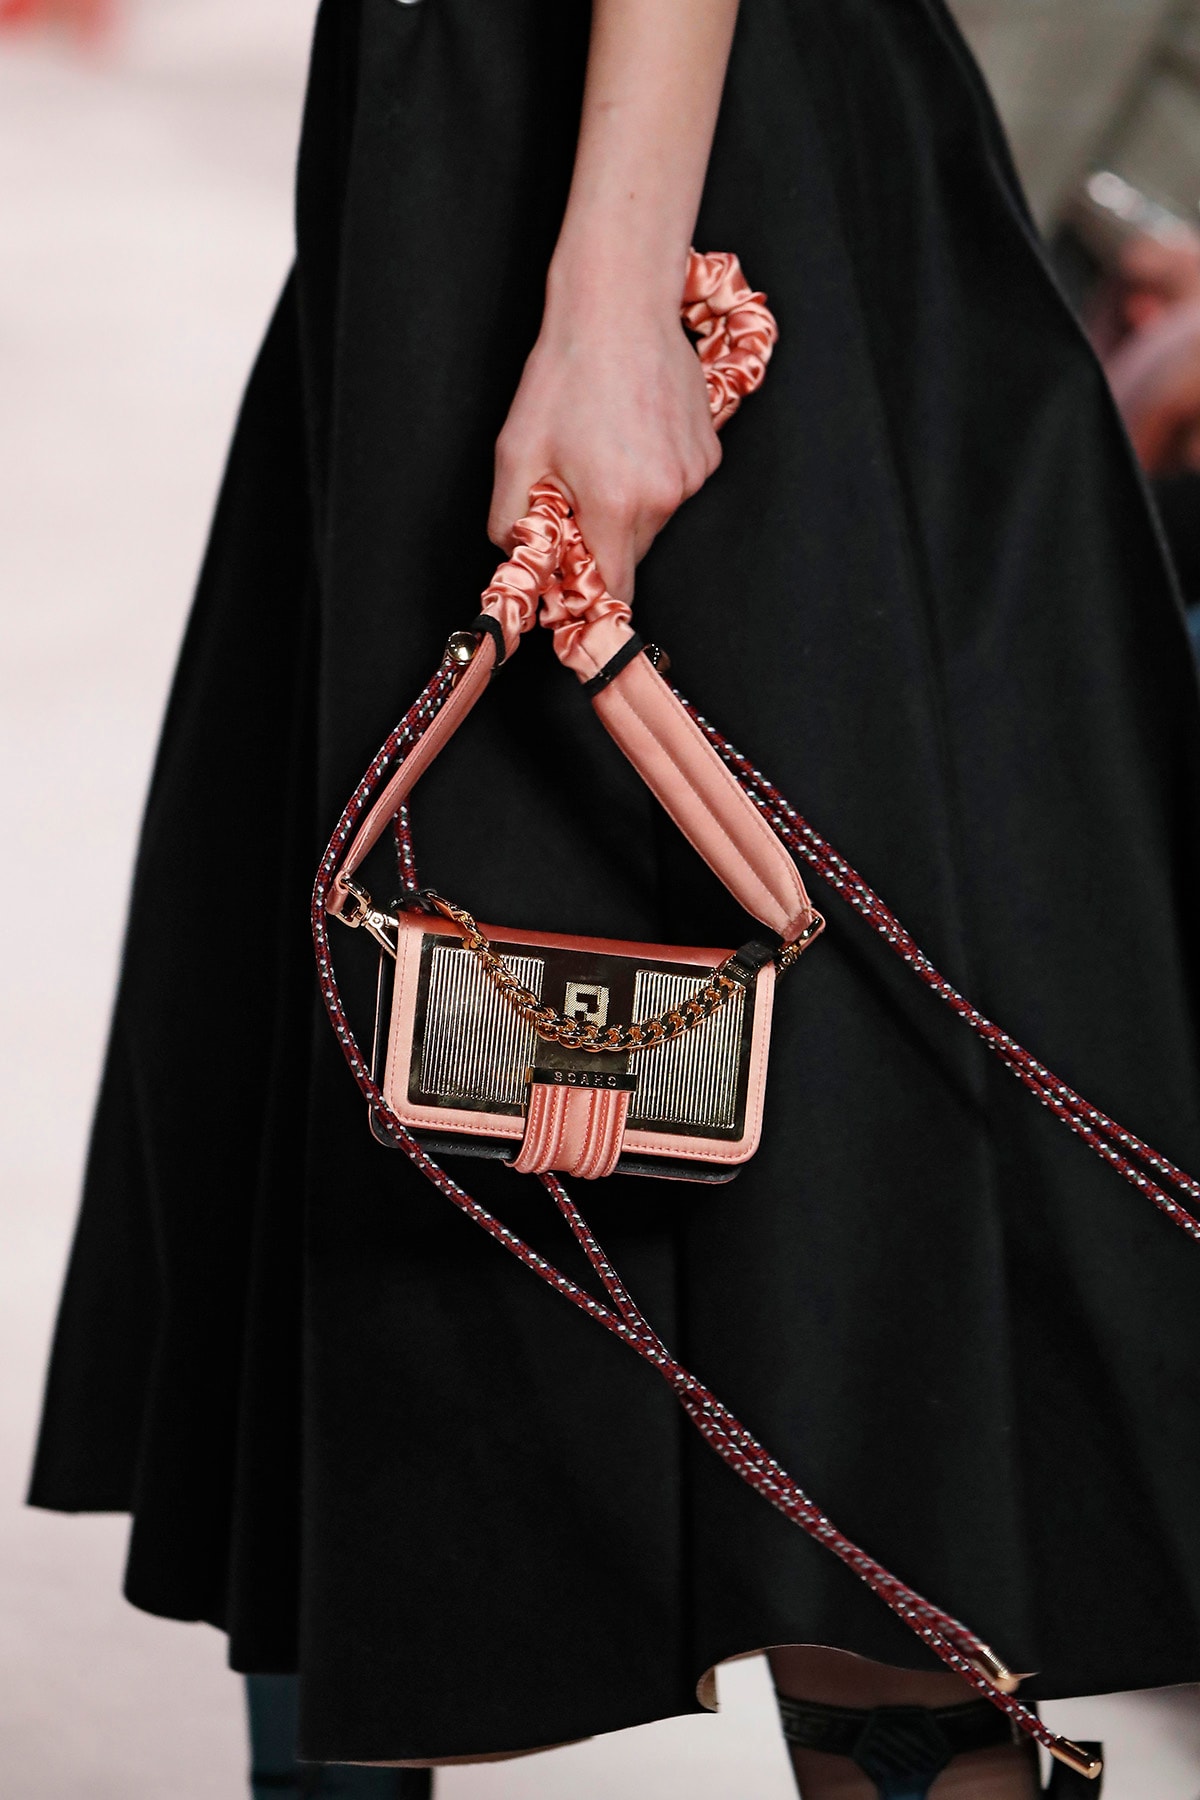 Chanel Cruise 2020: Our favorite jewelry pieces spotted on the runway